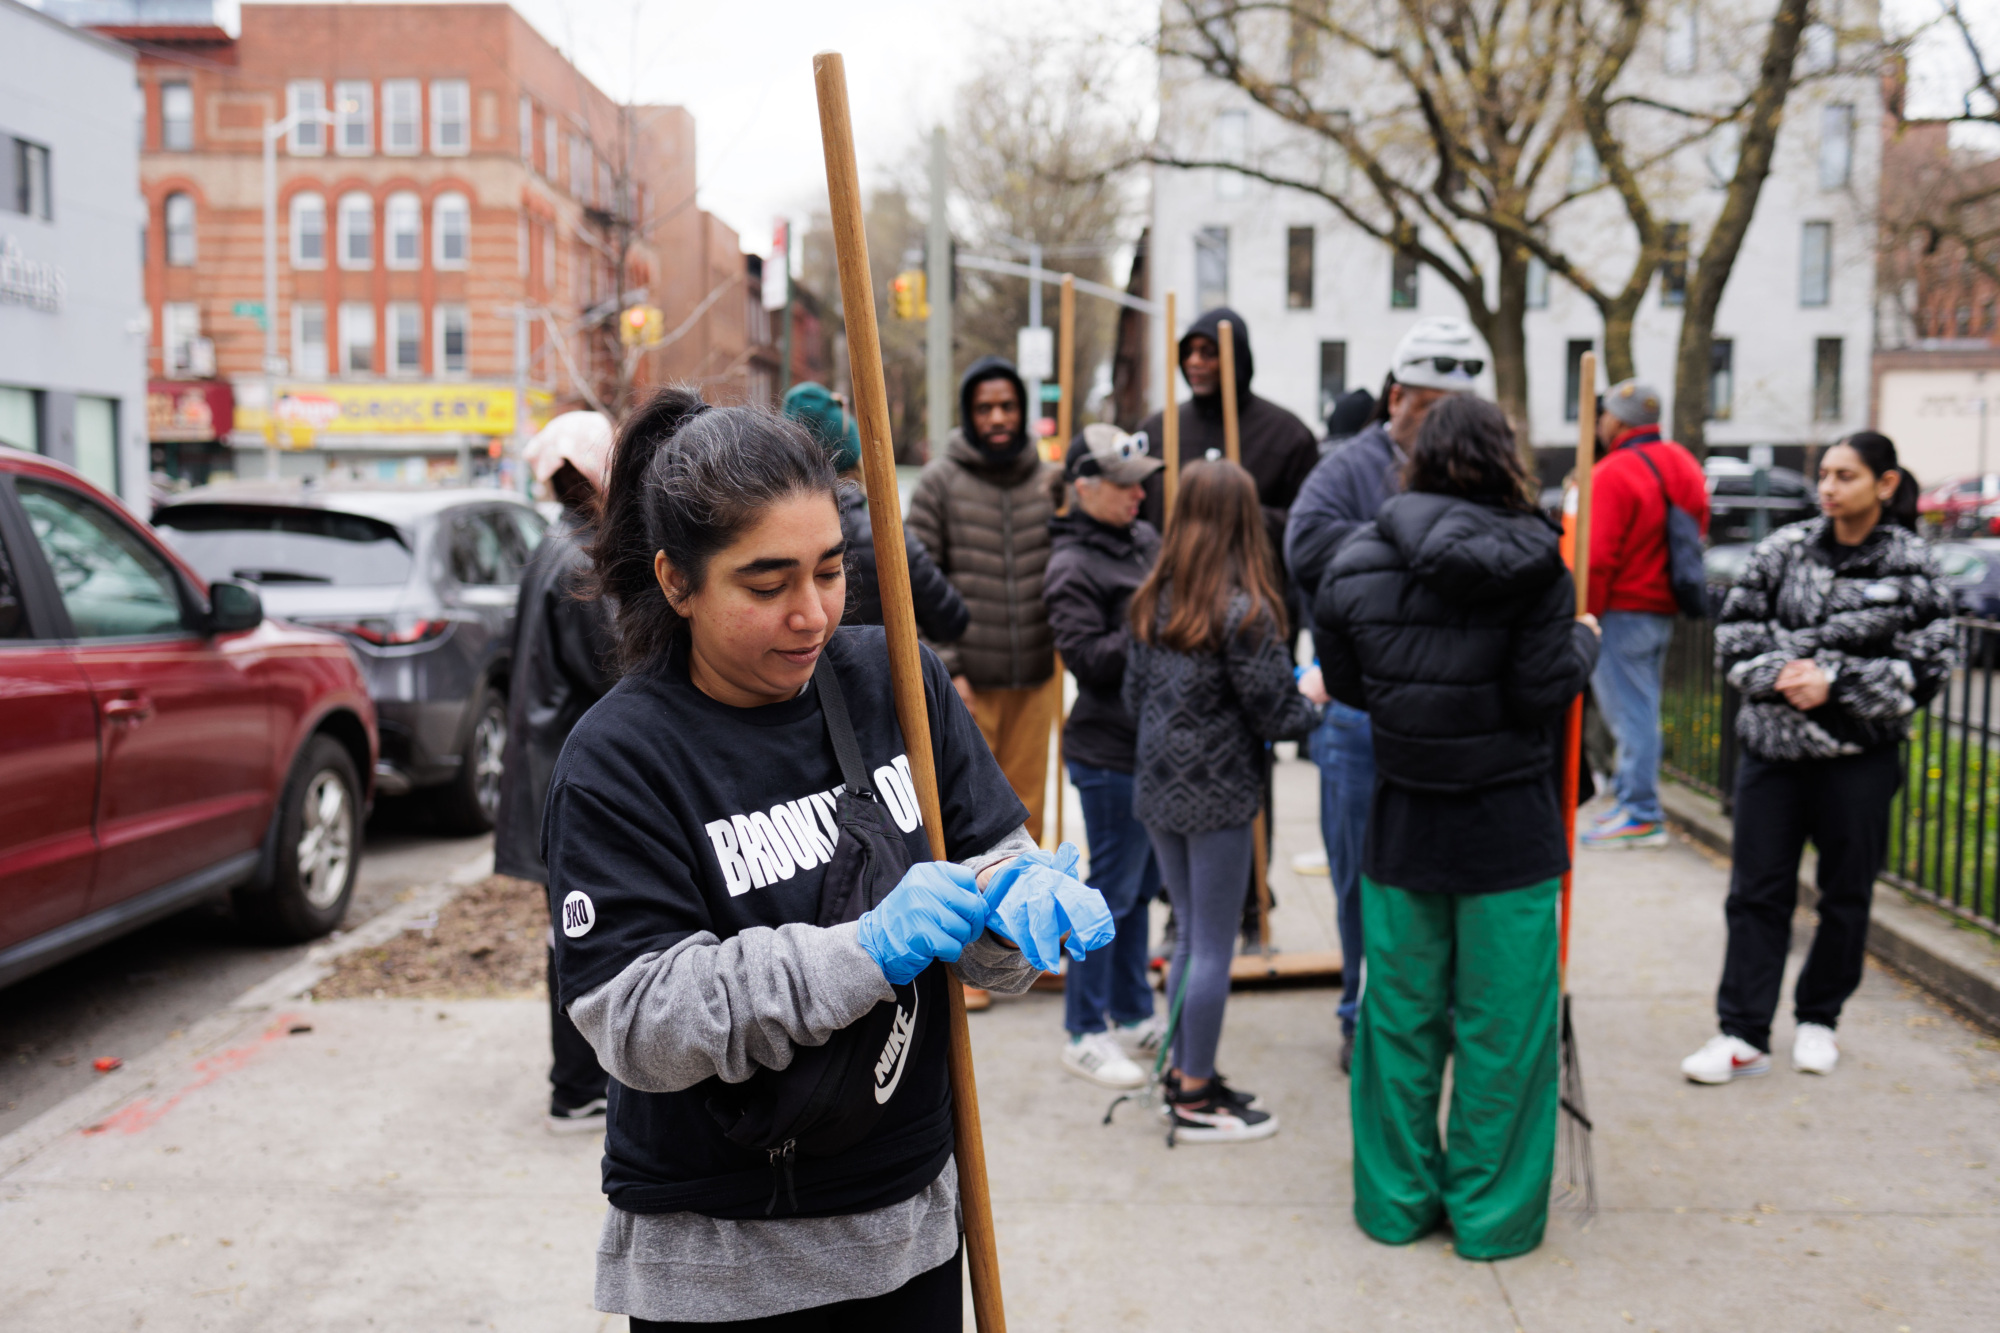 A woman wearing gloves and holding a wooden stick at a community cleaning event on a city street, with other participants in the background.